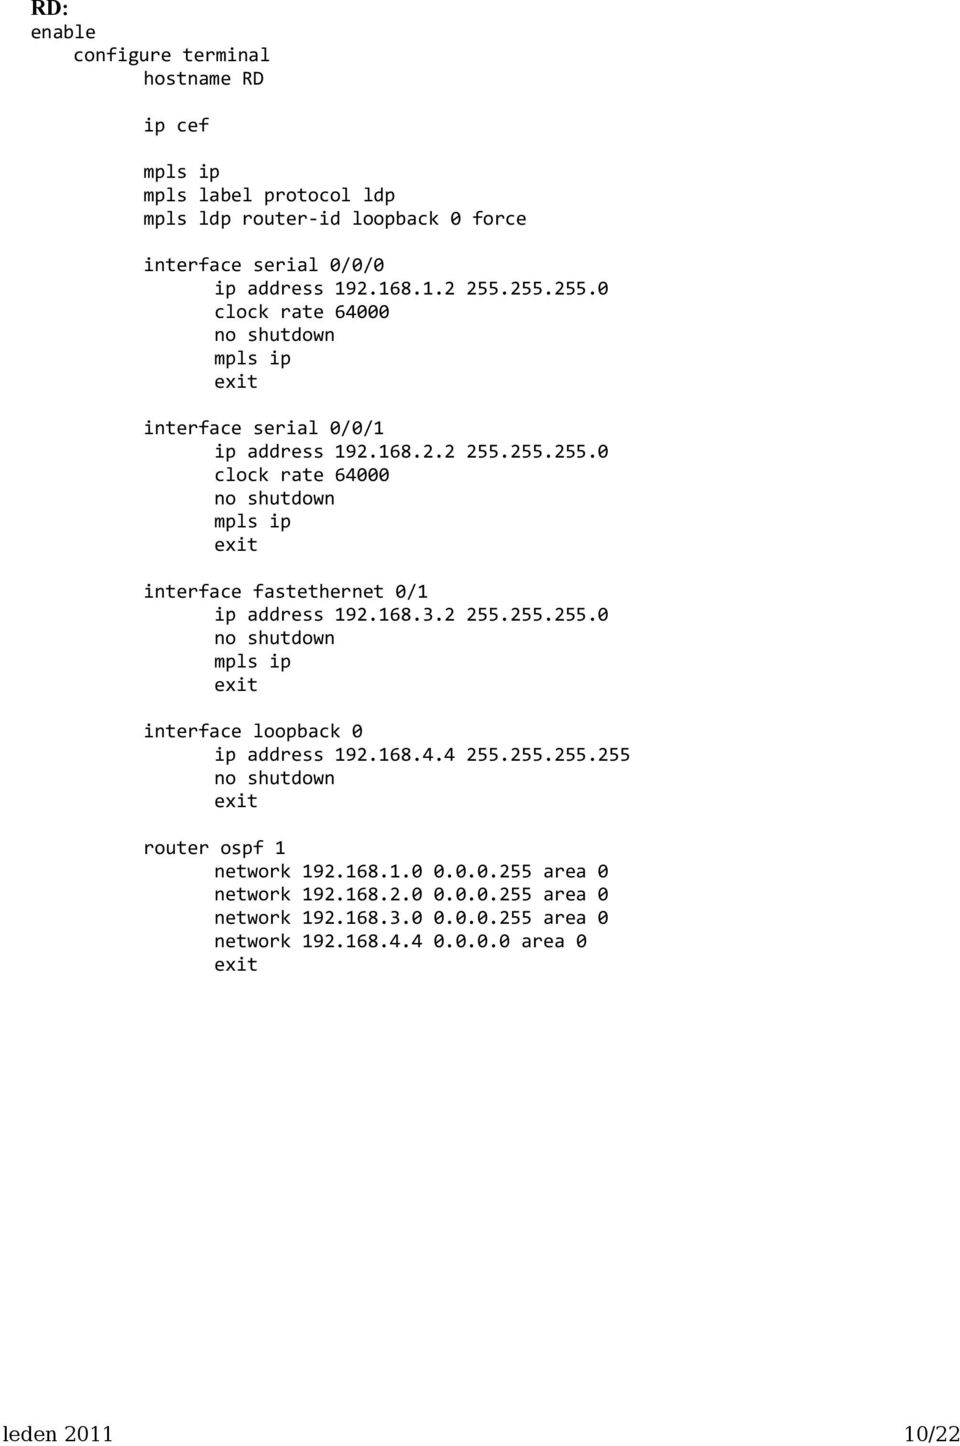 168.3.2 255.255.255.0 mpls ip interface loopback 0 ip address 192.168.4.4 255.255.255.255 router ospf 1 network 192.168.1.0 0.0.0.255 area 0 network 192.